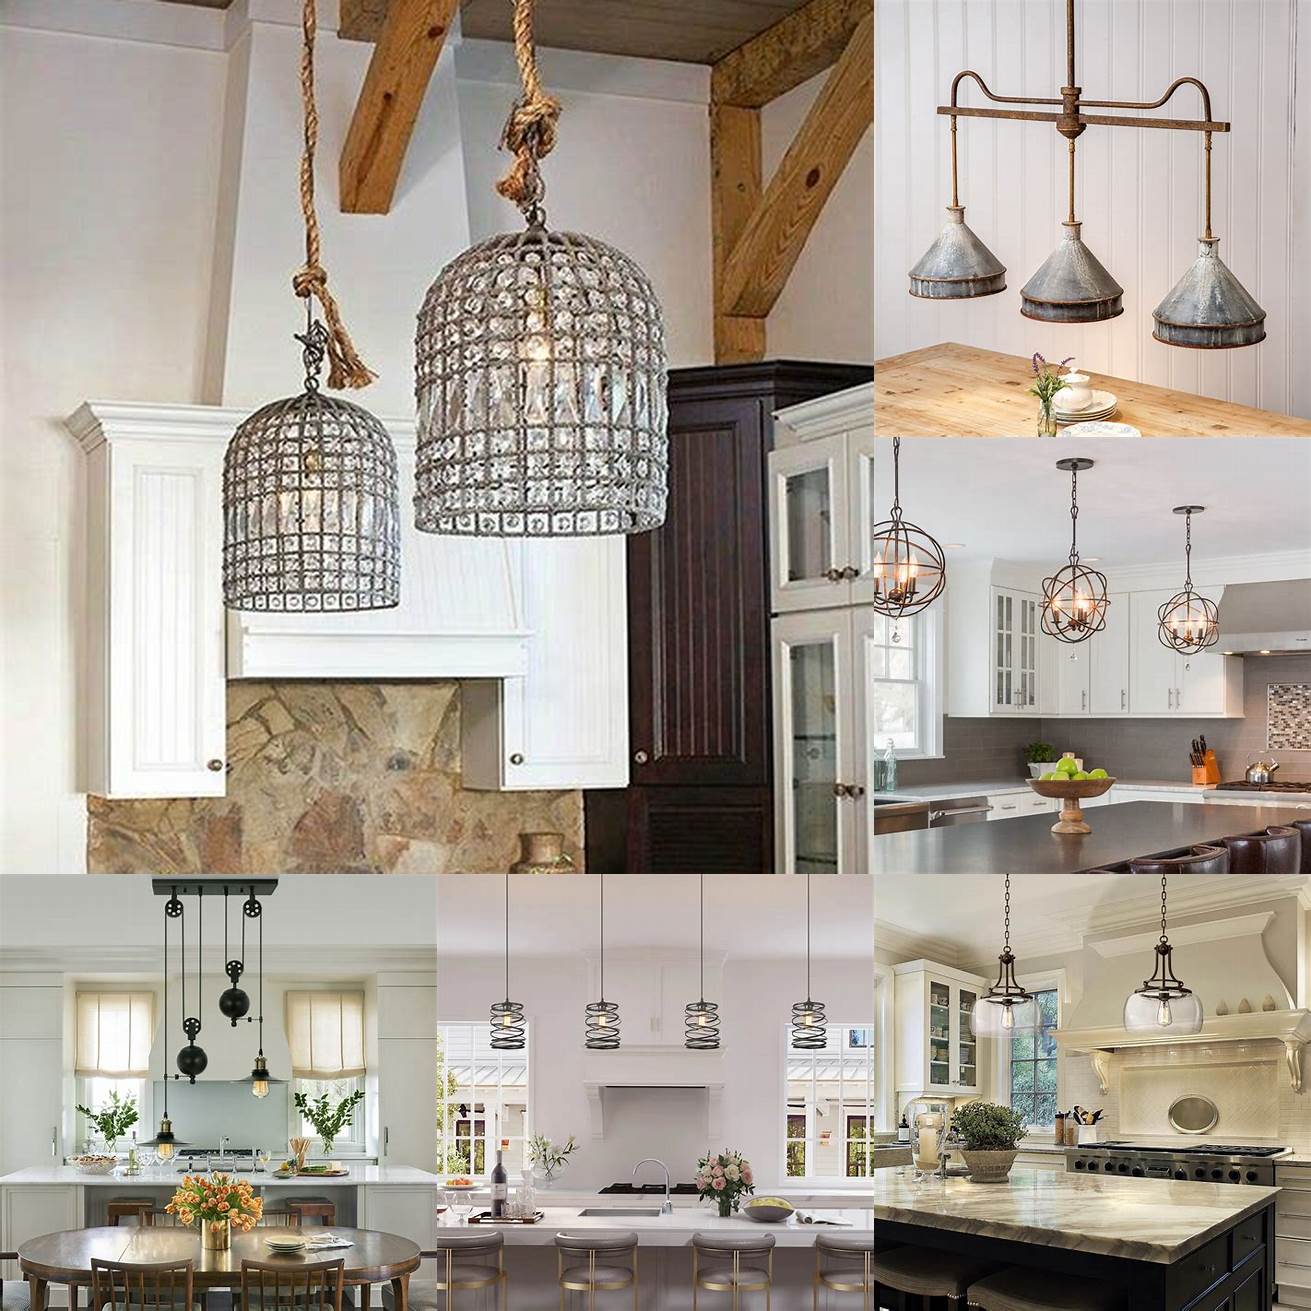 A statement pendant light can add a touch of elegance to a rustic table